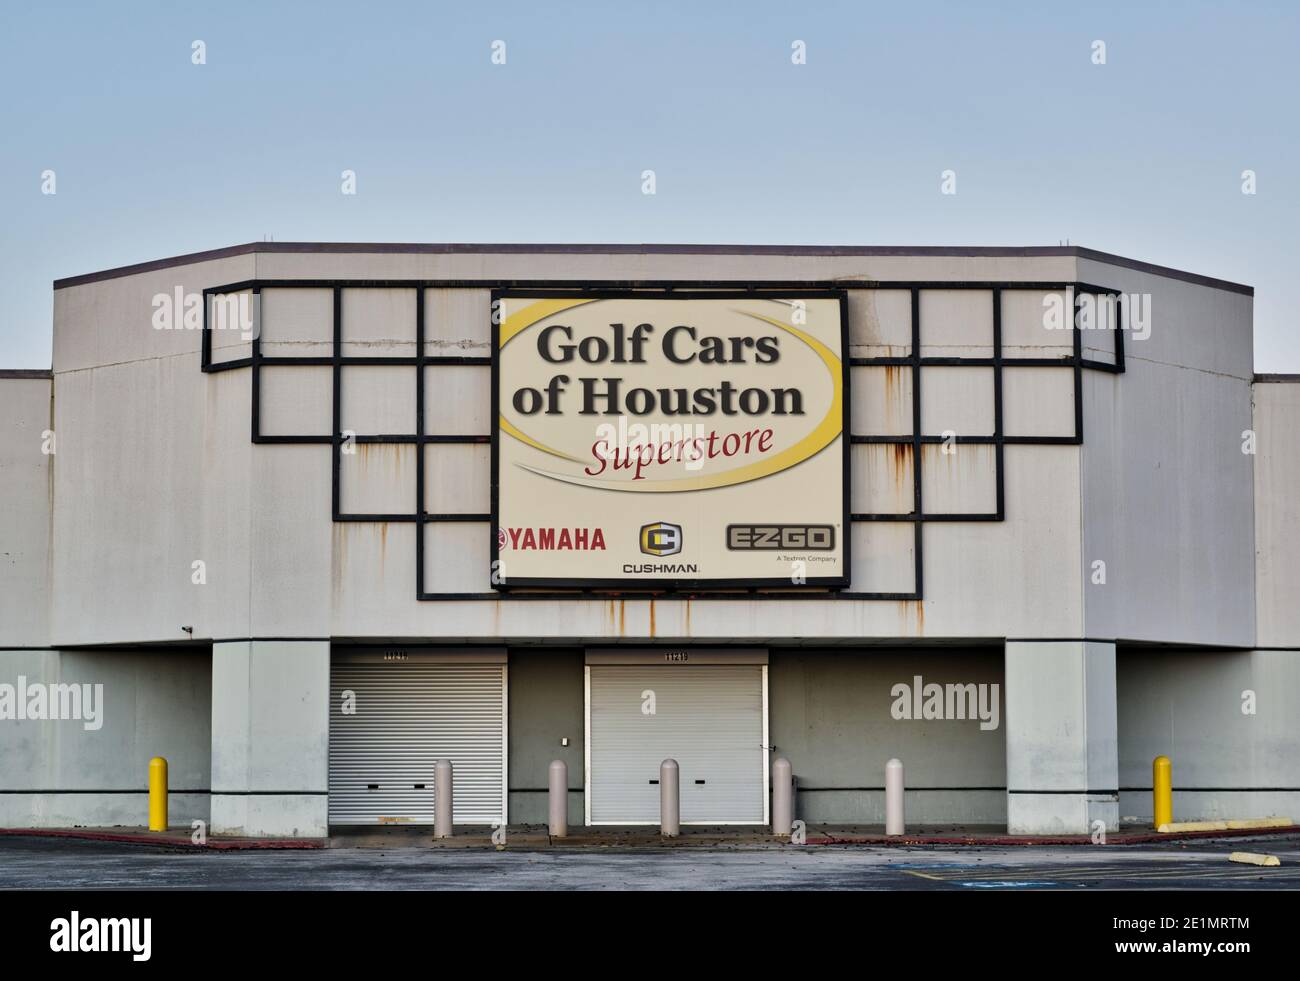 Houston, Texas USA 01-01-2021: Golf Cars of Houston storefront in Houston, TX with parking lot in foreground. Stock Photo